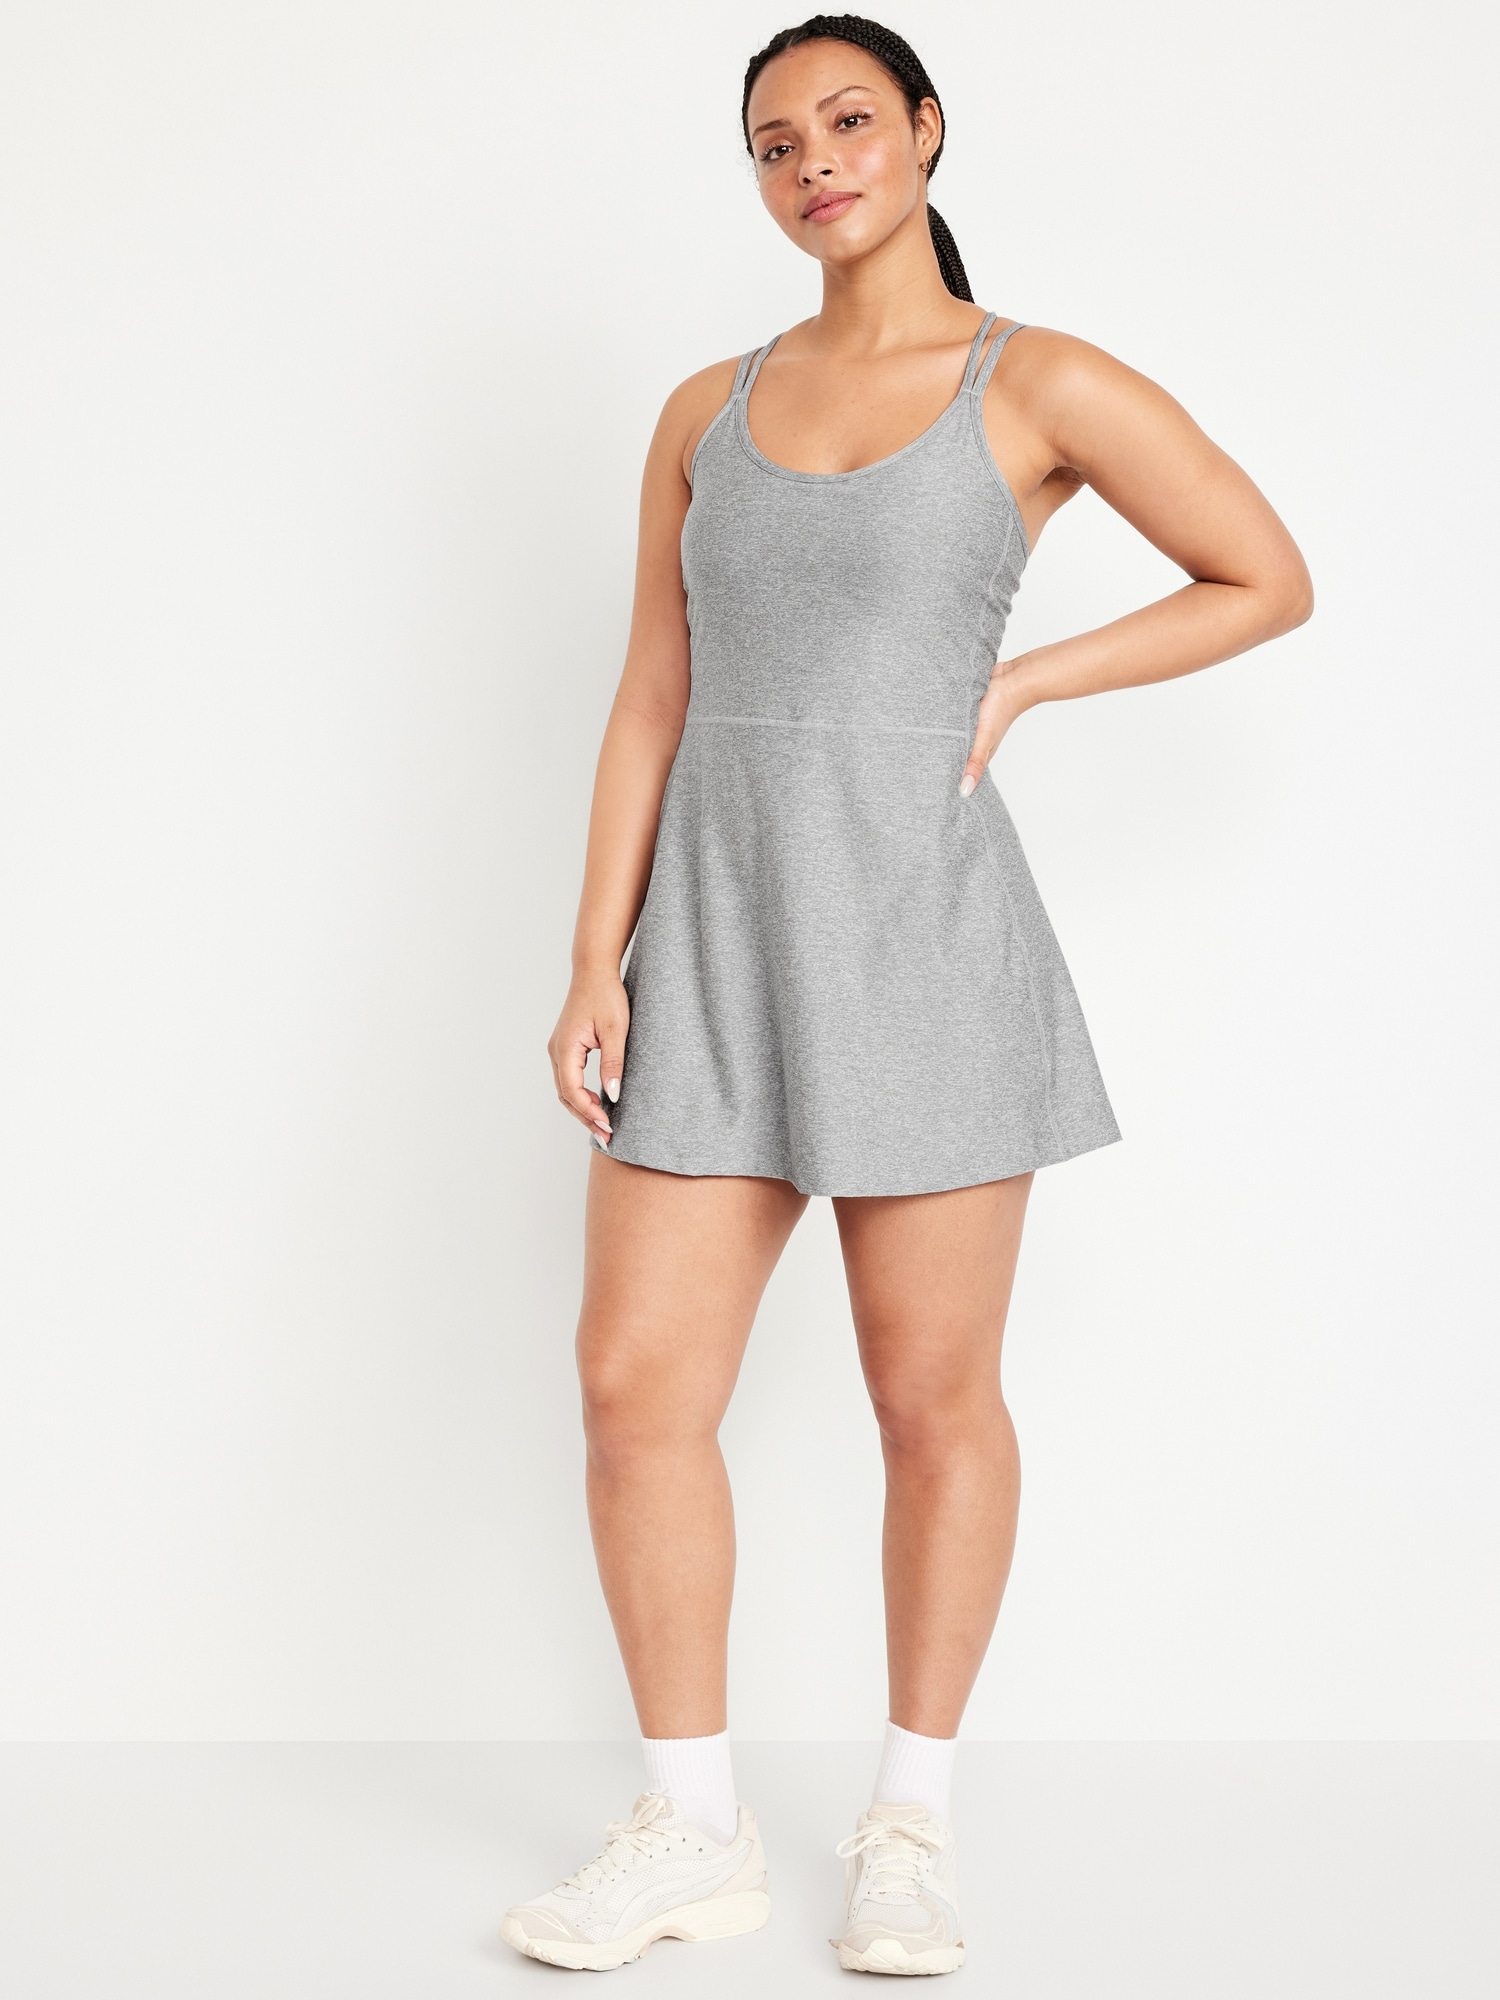 Cloud+ Strappy Athletic Dress